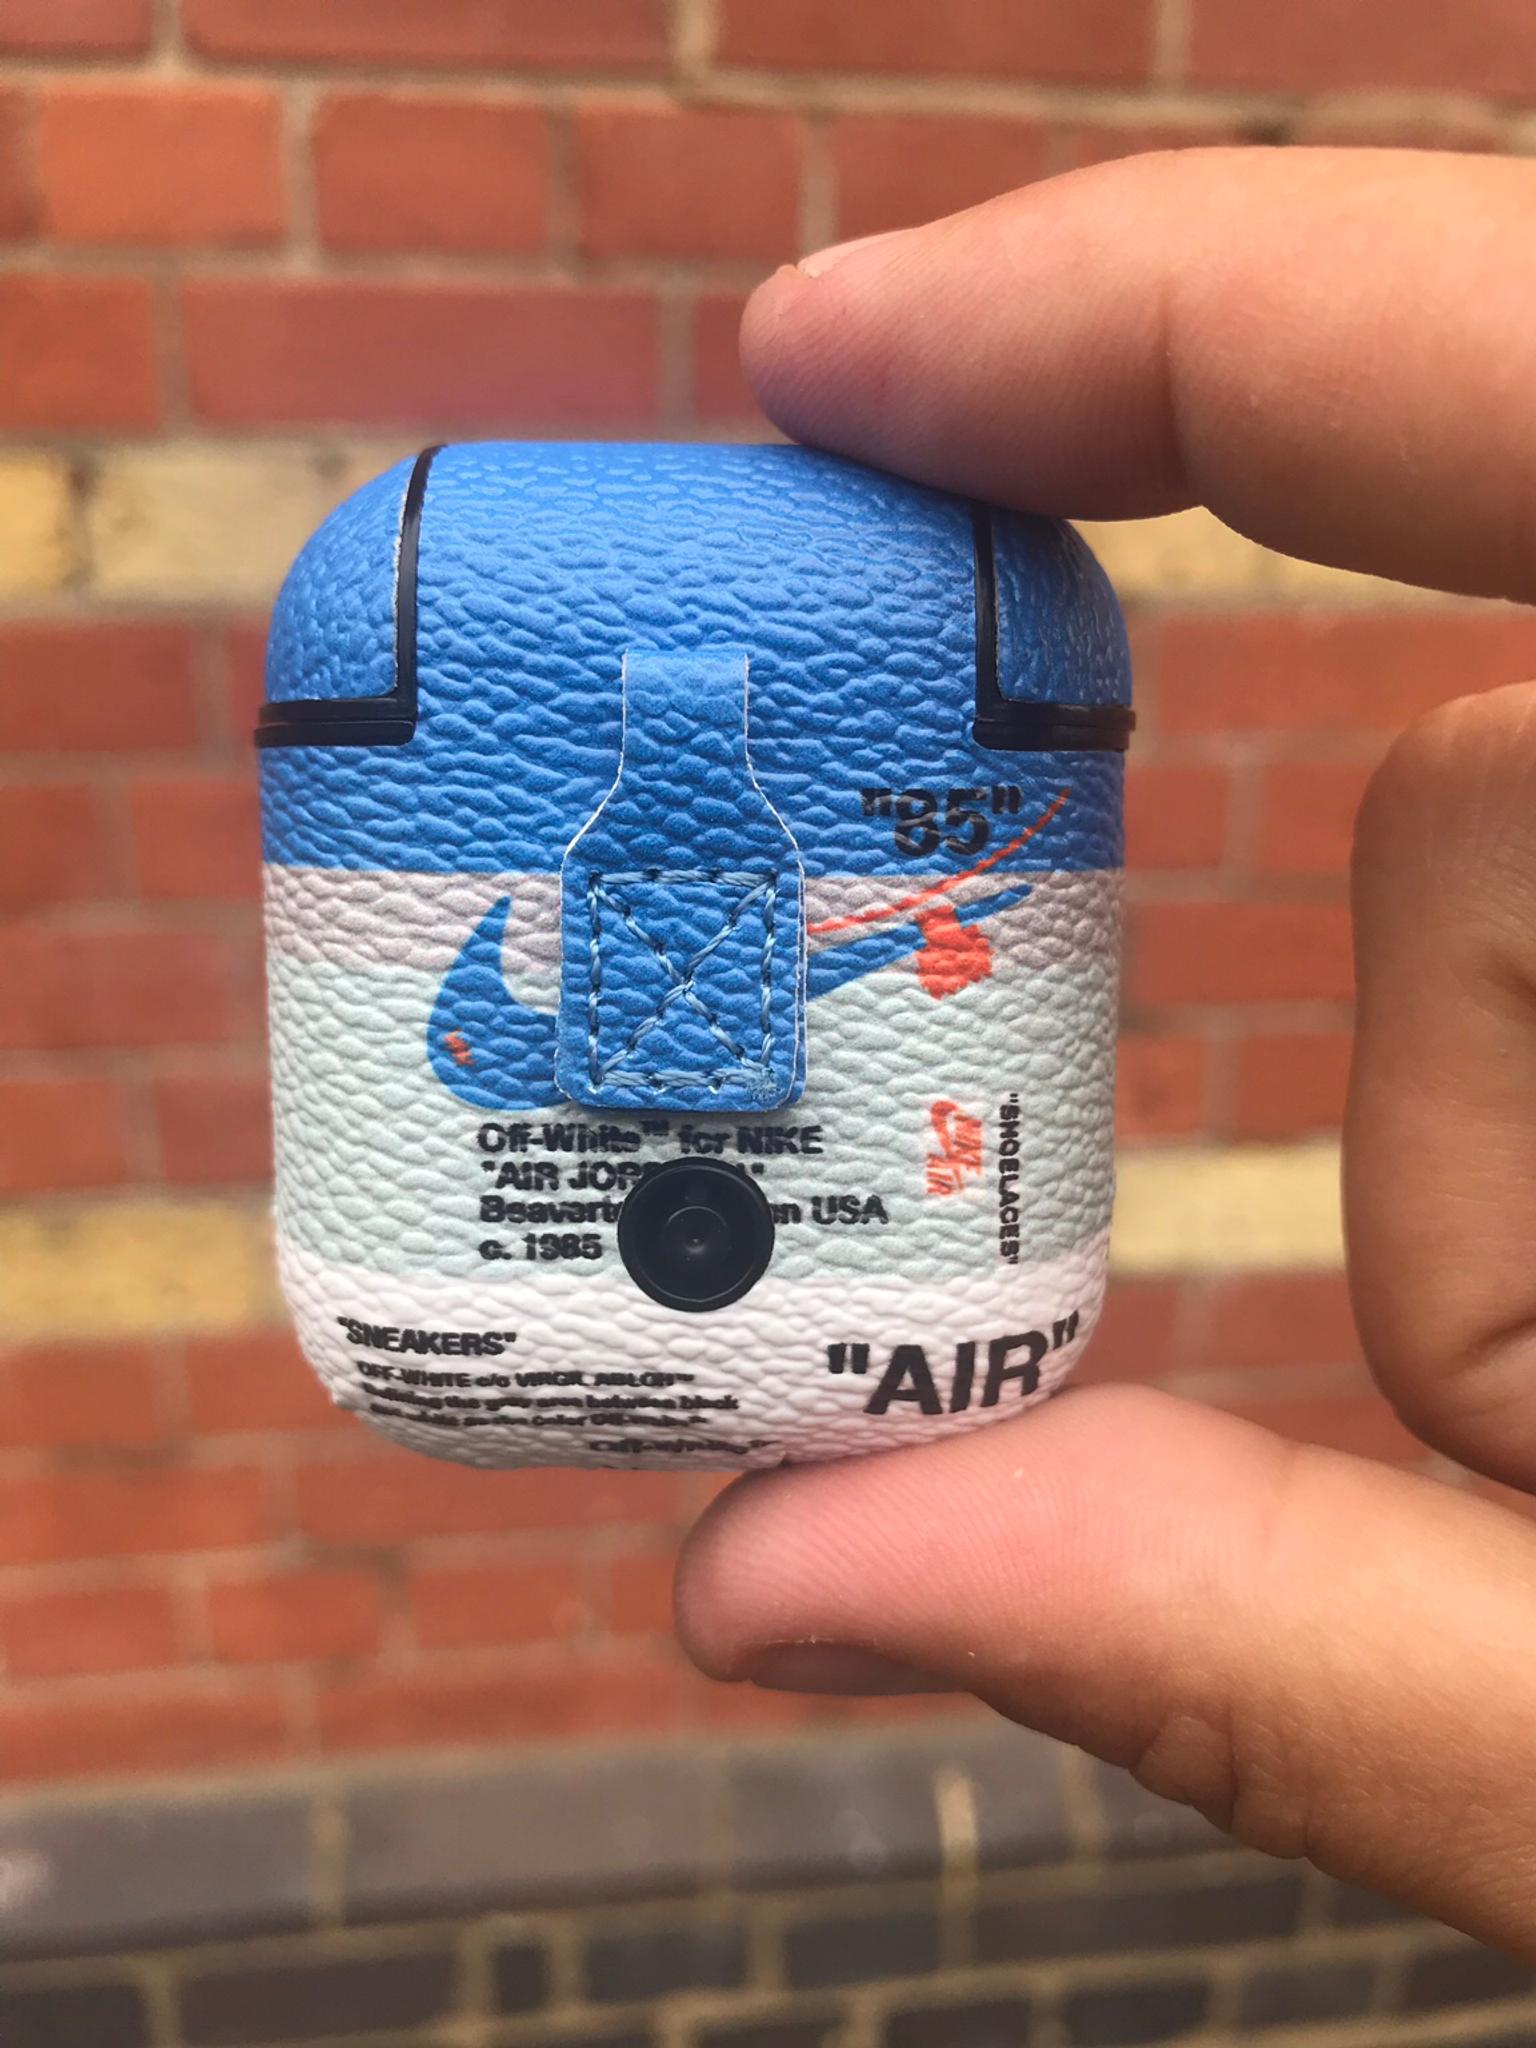 cover airpods nike off white